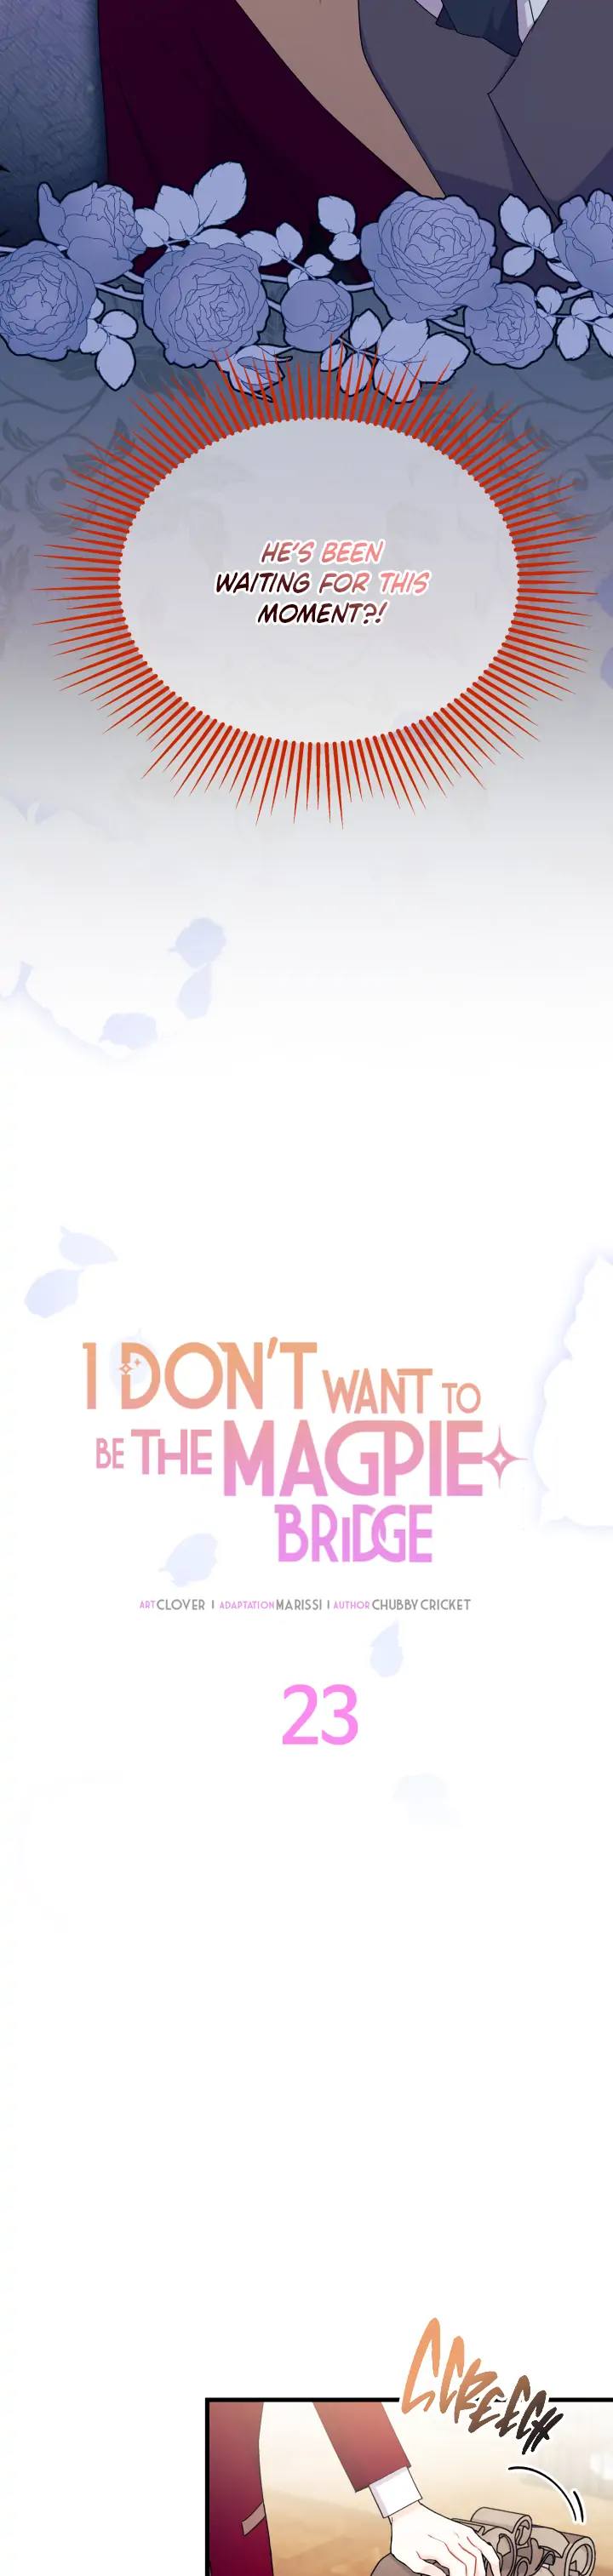 I Don’t Want To Be a Magpie Bridge chapter 23